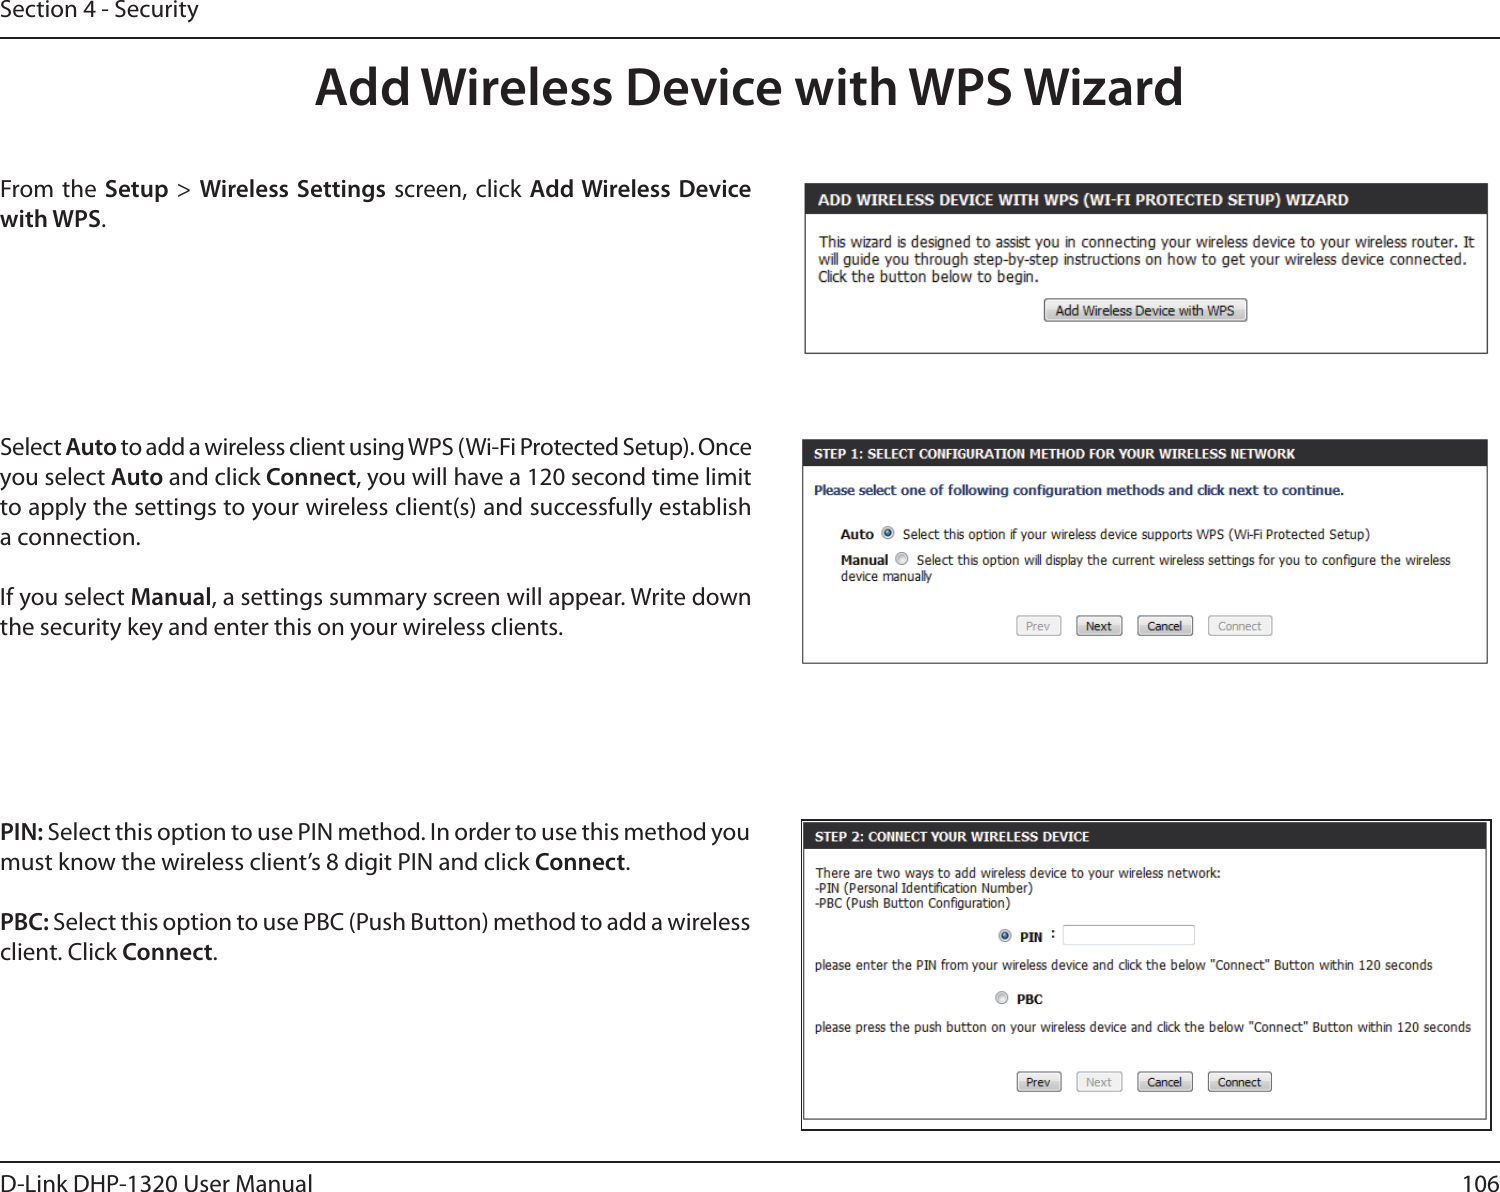 106D-Link DHP-1320 User ManualSection 4 - SecurityFrom the  Setup &gt; Wireless Settings  screen, click  Add Wireless Device with WPS.Add Wireless Device with WPS WizardPIN: Select this option to use PIN method. In order to use this method you must know the wireless client’s 8 digit PIN and click Connect.PBC: Select this option to use PBC (Push Button) method to add a wireless client. Click Connect.Select Auto to add a wireless client using WPS (Wi-Fi Protected Setup). Once you select Auto and click Connect, you will have a 120 second time limit to apply the settings to your wireless client(s) and successfully establish a connection. If you select Manual, a settings summary screen will appear. Write down the security key and enter this on your wireless clients. 